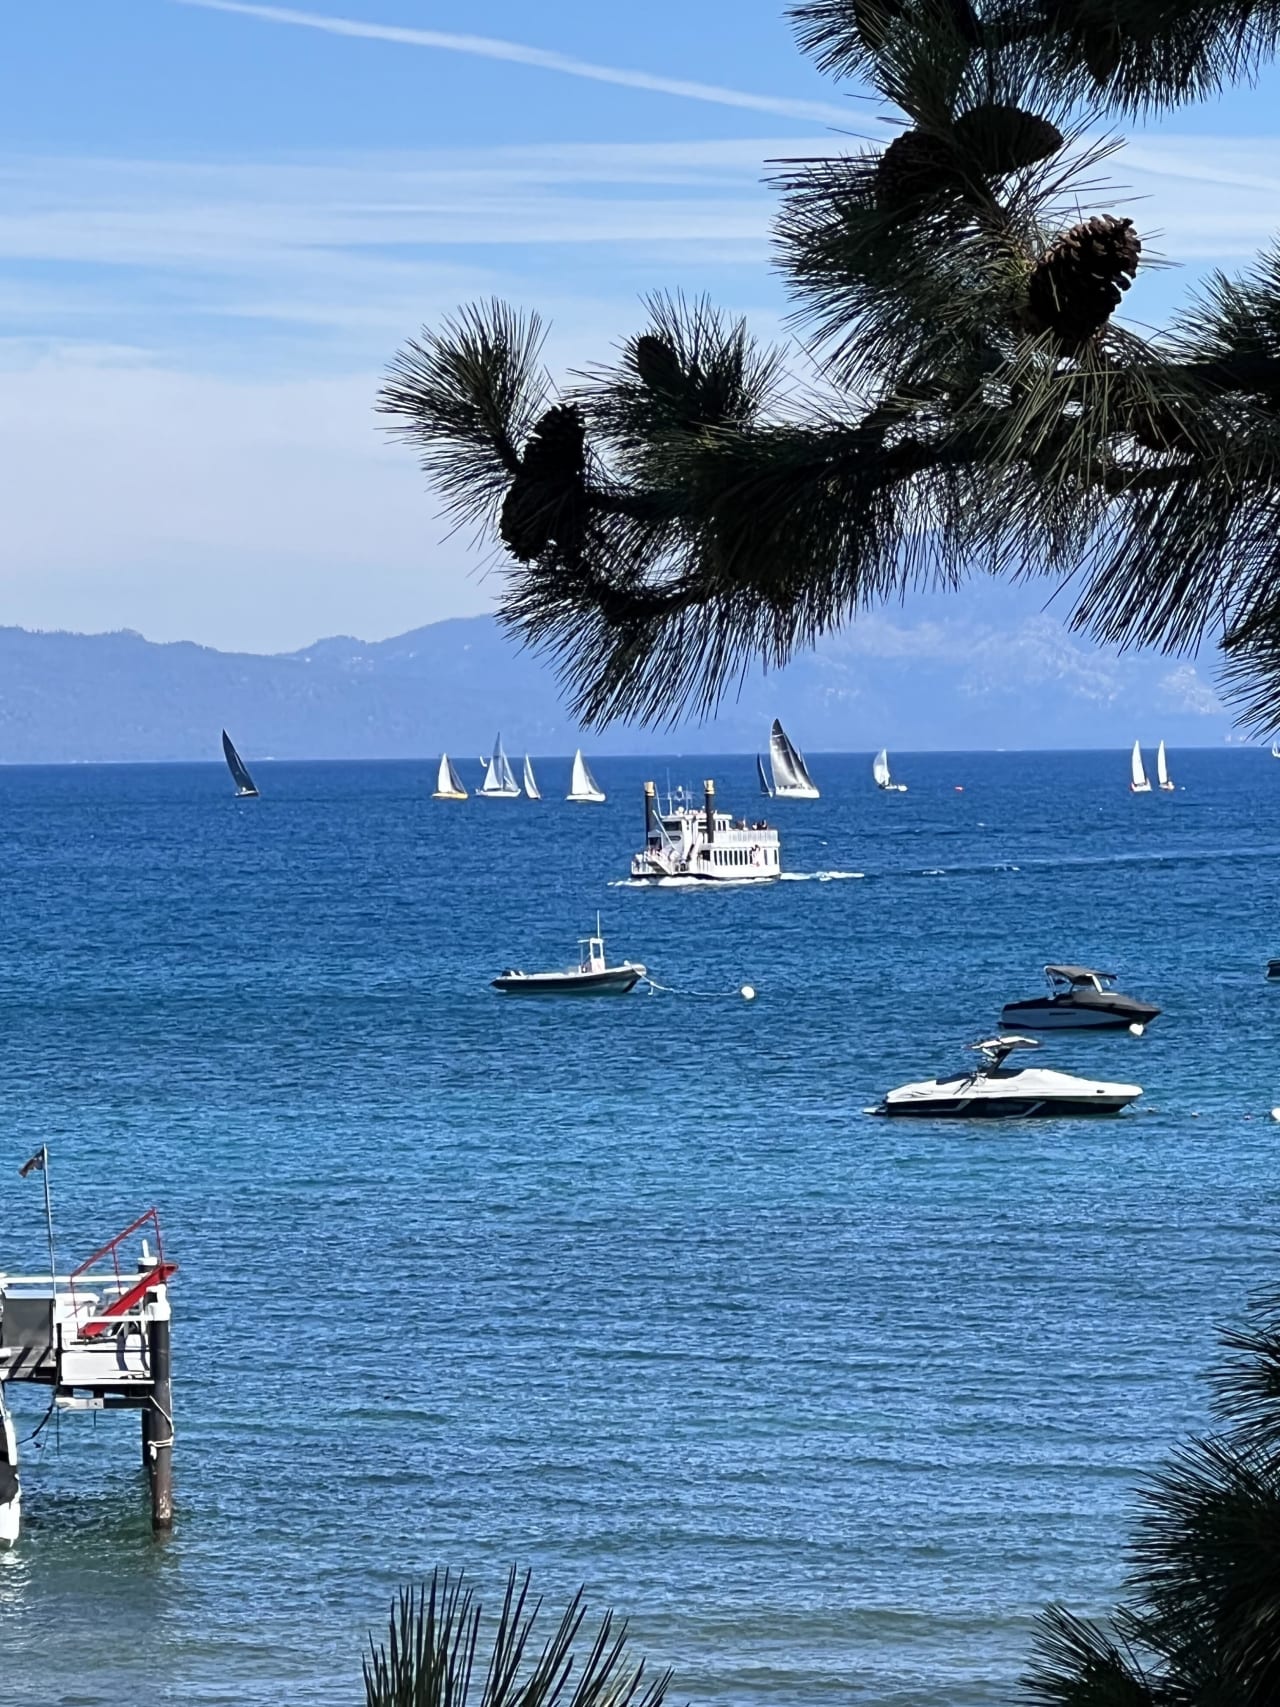 Short Term Rental Income and protecting the essence of Lake Tahoe: The Pros and Cons of Short-Term Rentals in Lake Tahoe